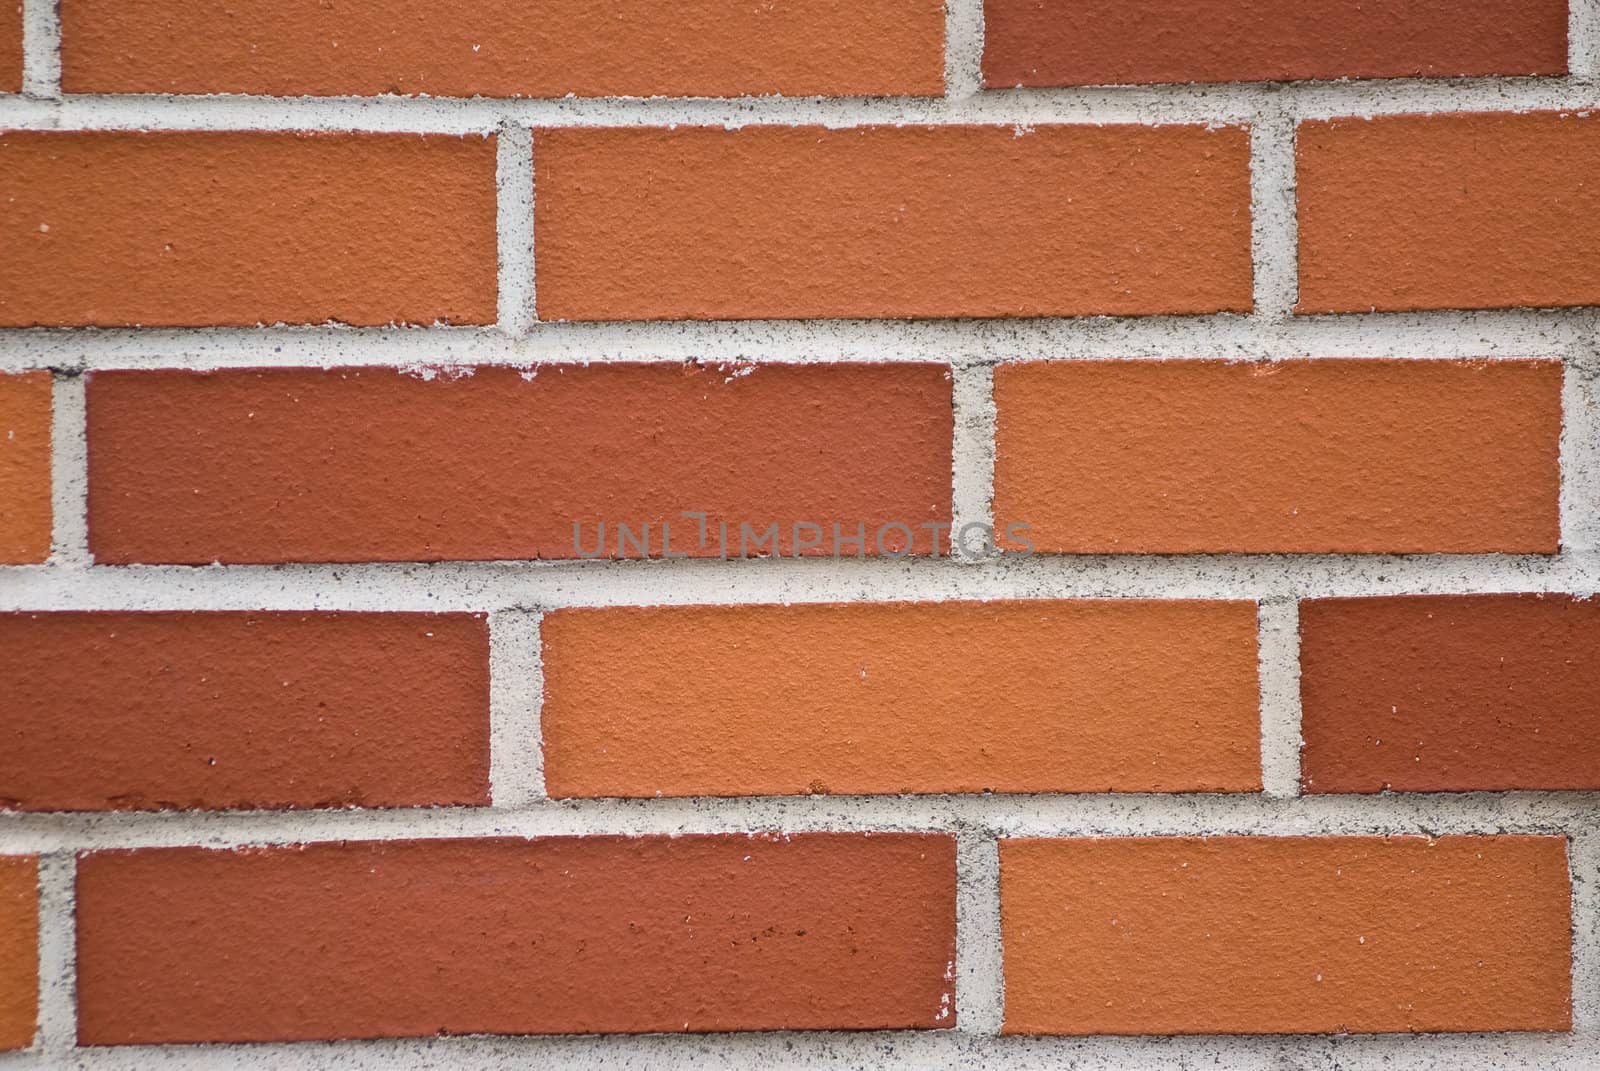 a brickwall with stones in shades of red and orange